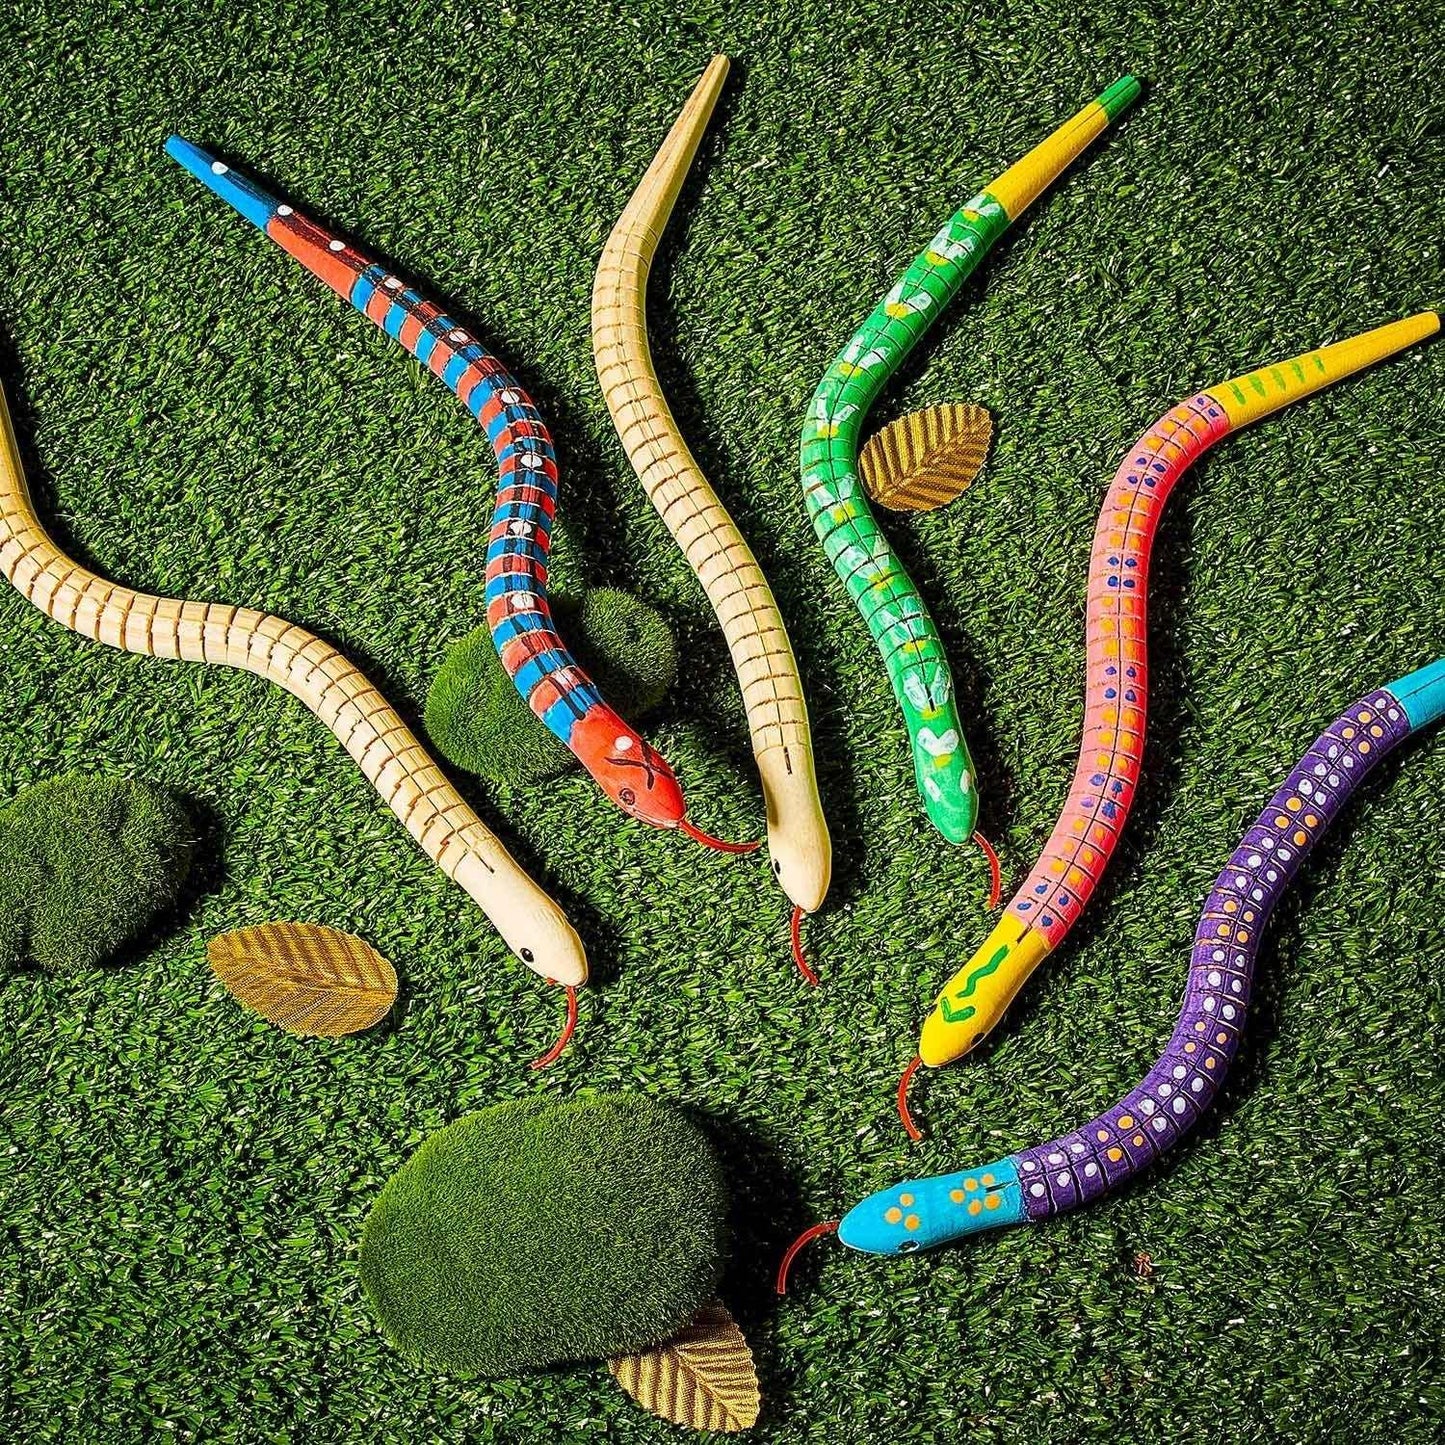 10 Pieces Wooden Snake Unfinished Wiggly Jointed Flexible Wooden with 12 Colors Acrylic Craft Paint and 2 Pieces Paint Brush - WoodArtSupply